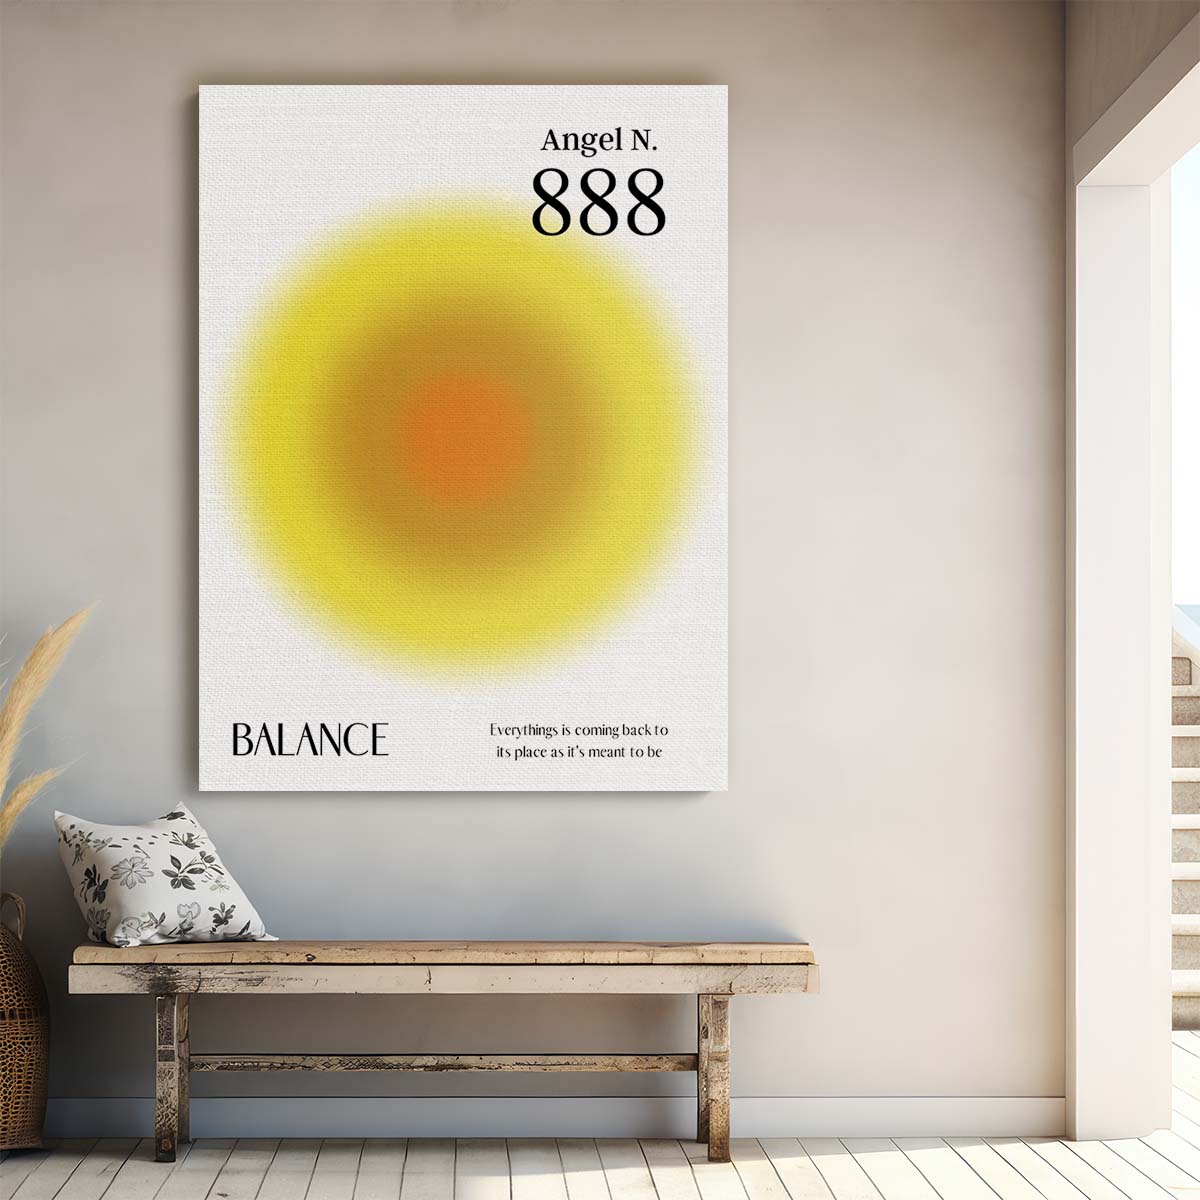 Colorful Angel Number 888 Illustration Positive Energy Manifestation Poster by Luxuriance Designs, made in USA